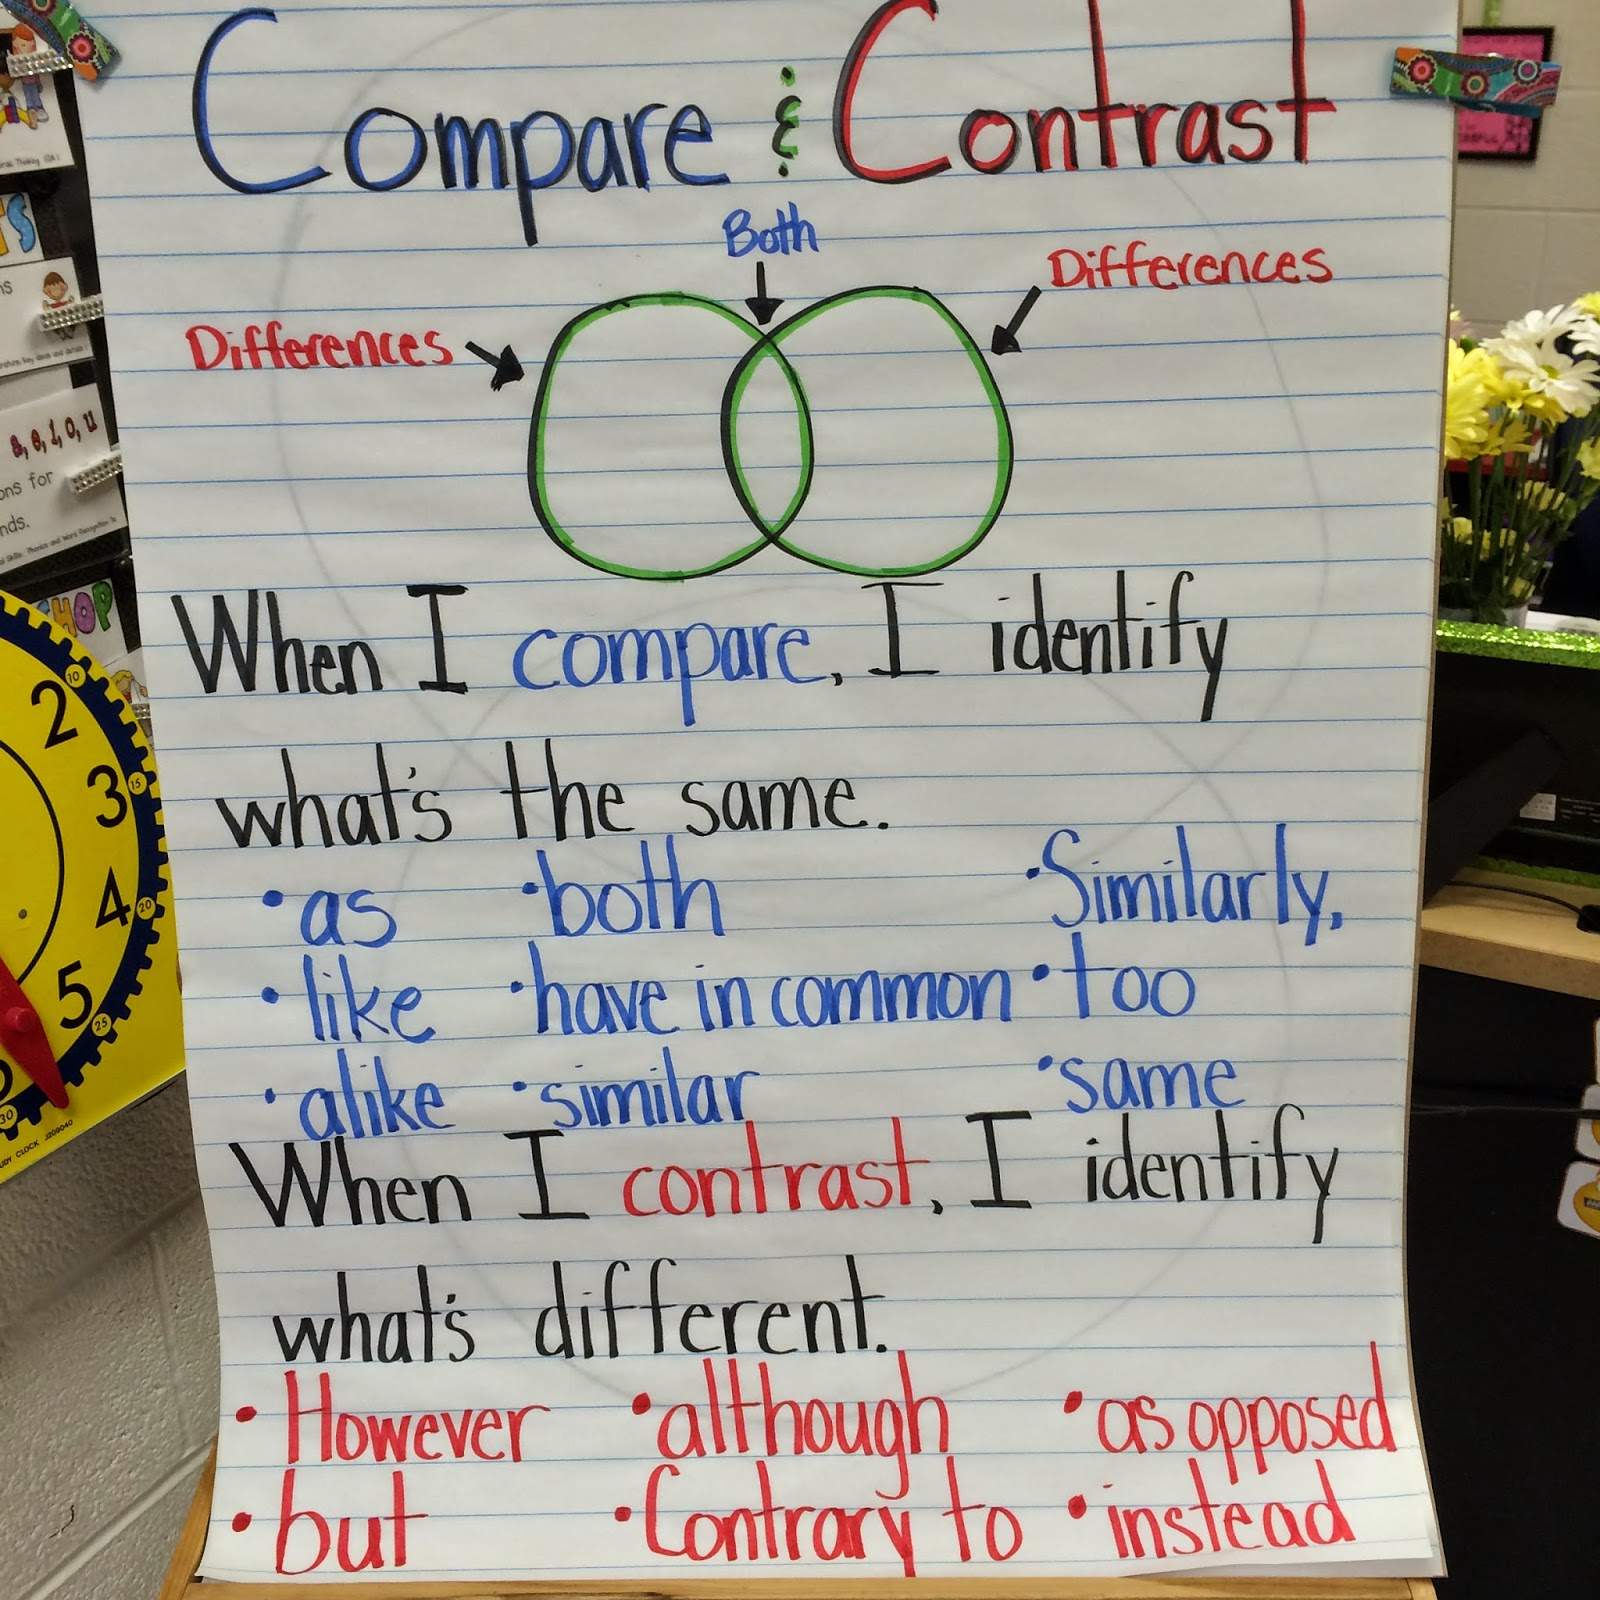 Compare and Contrast Activity Fun!